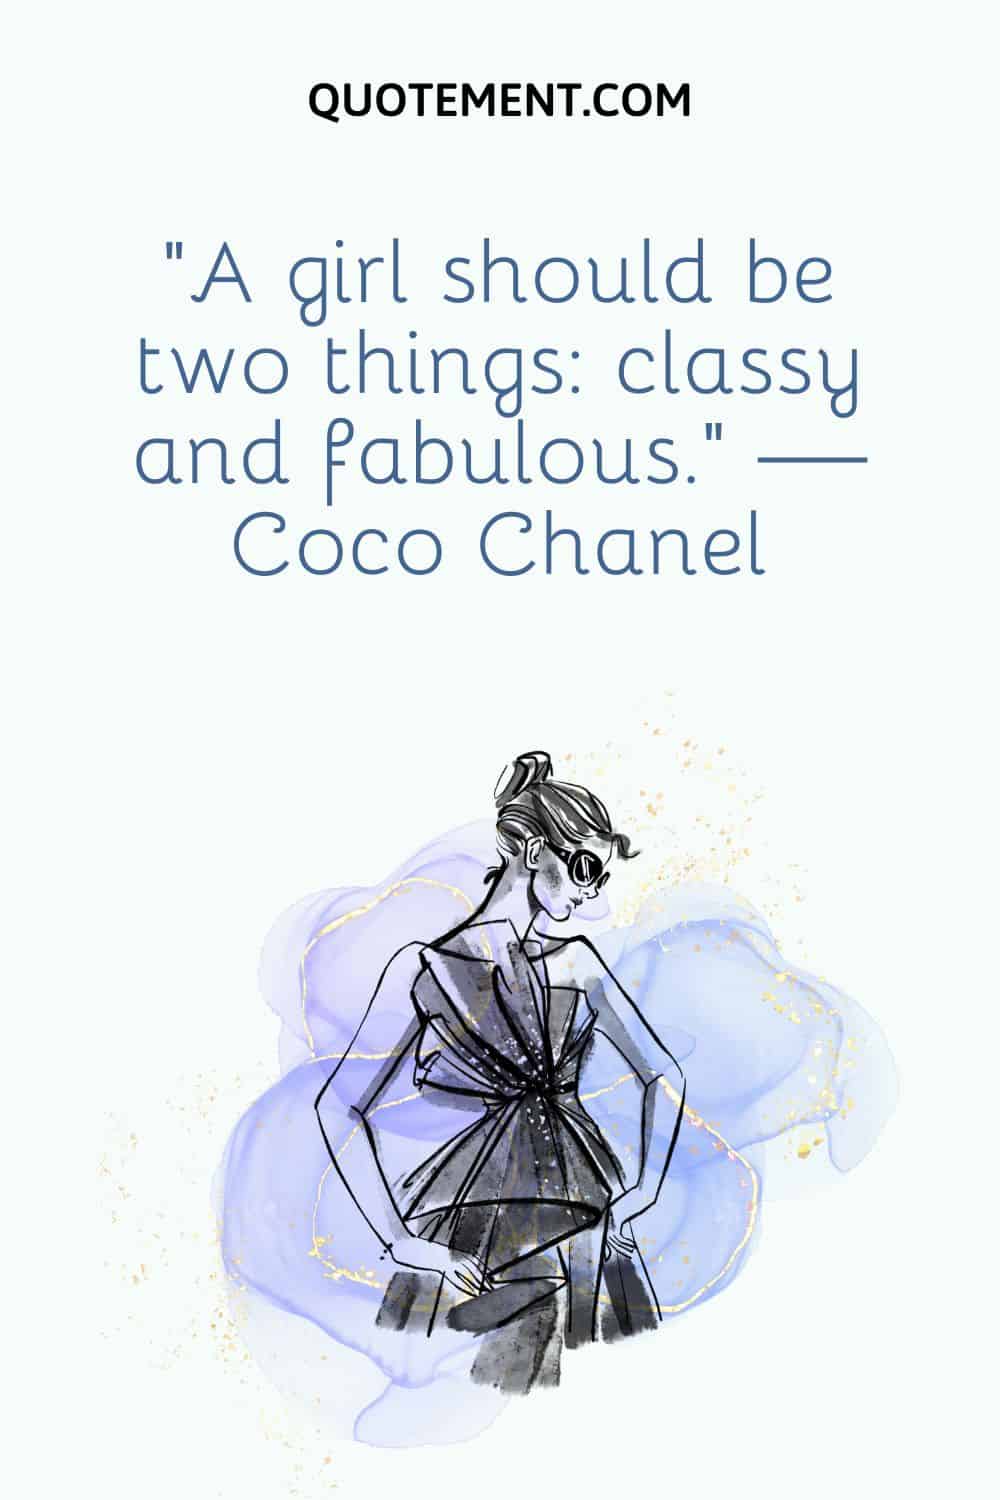 classy chick image representing classy quote for Instagram